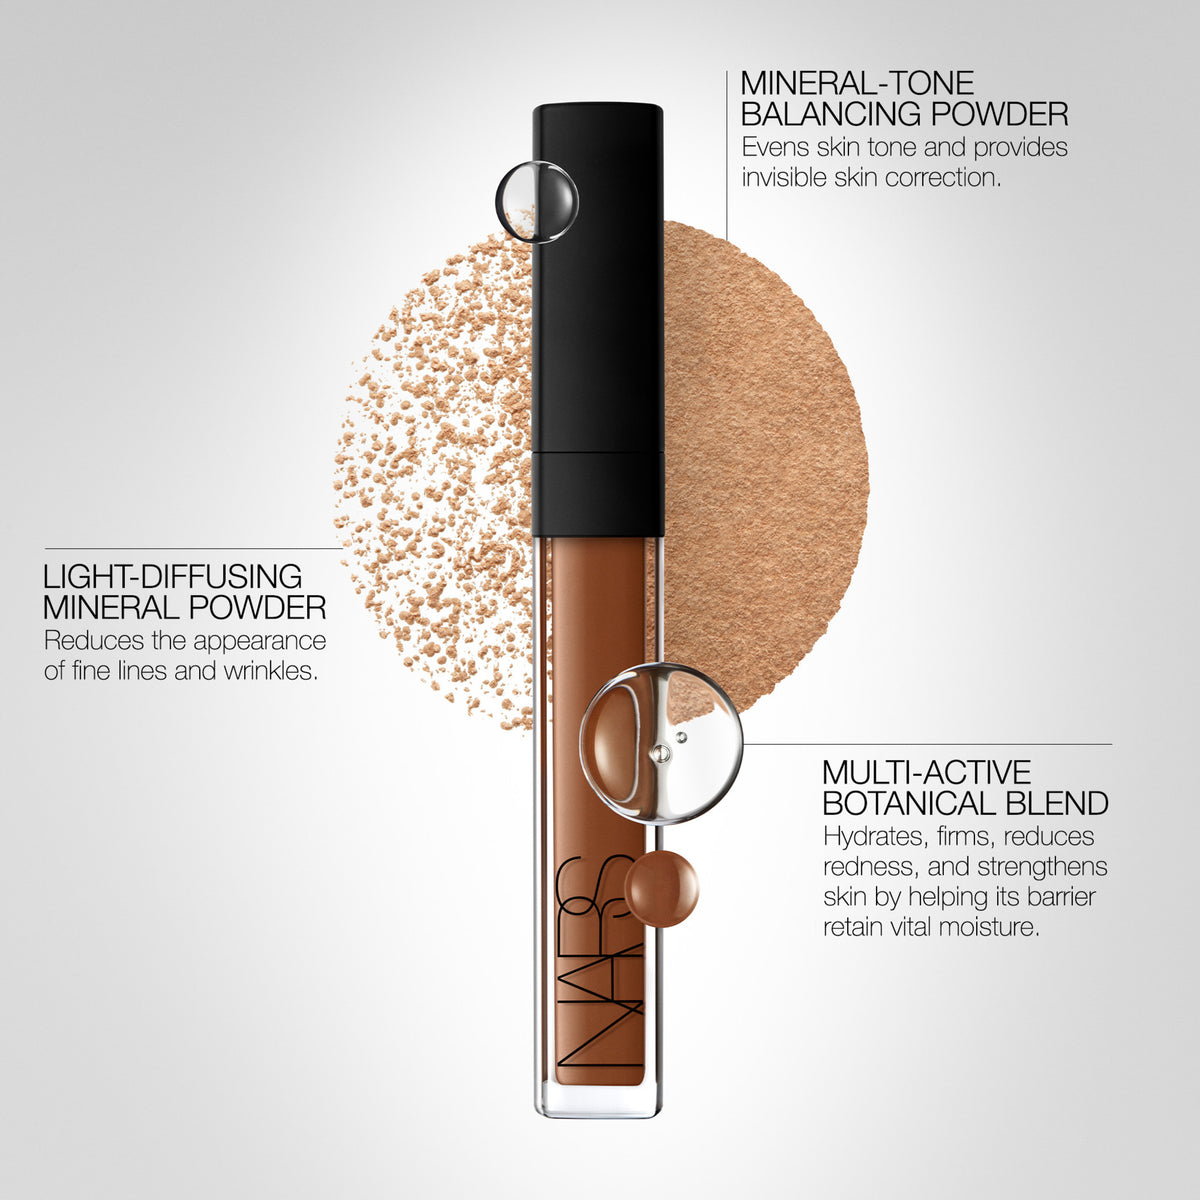 Nars Radiant Creamy Concealer . This product is for deep warm complexions